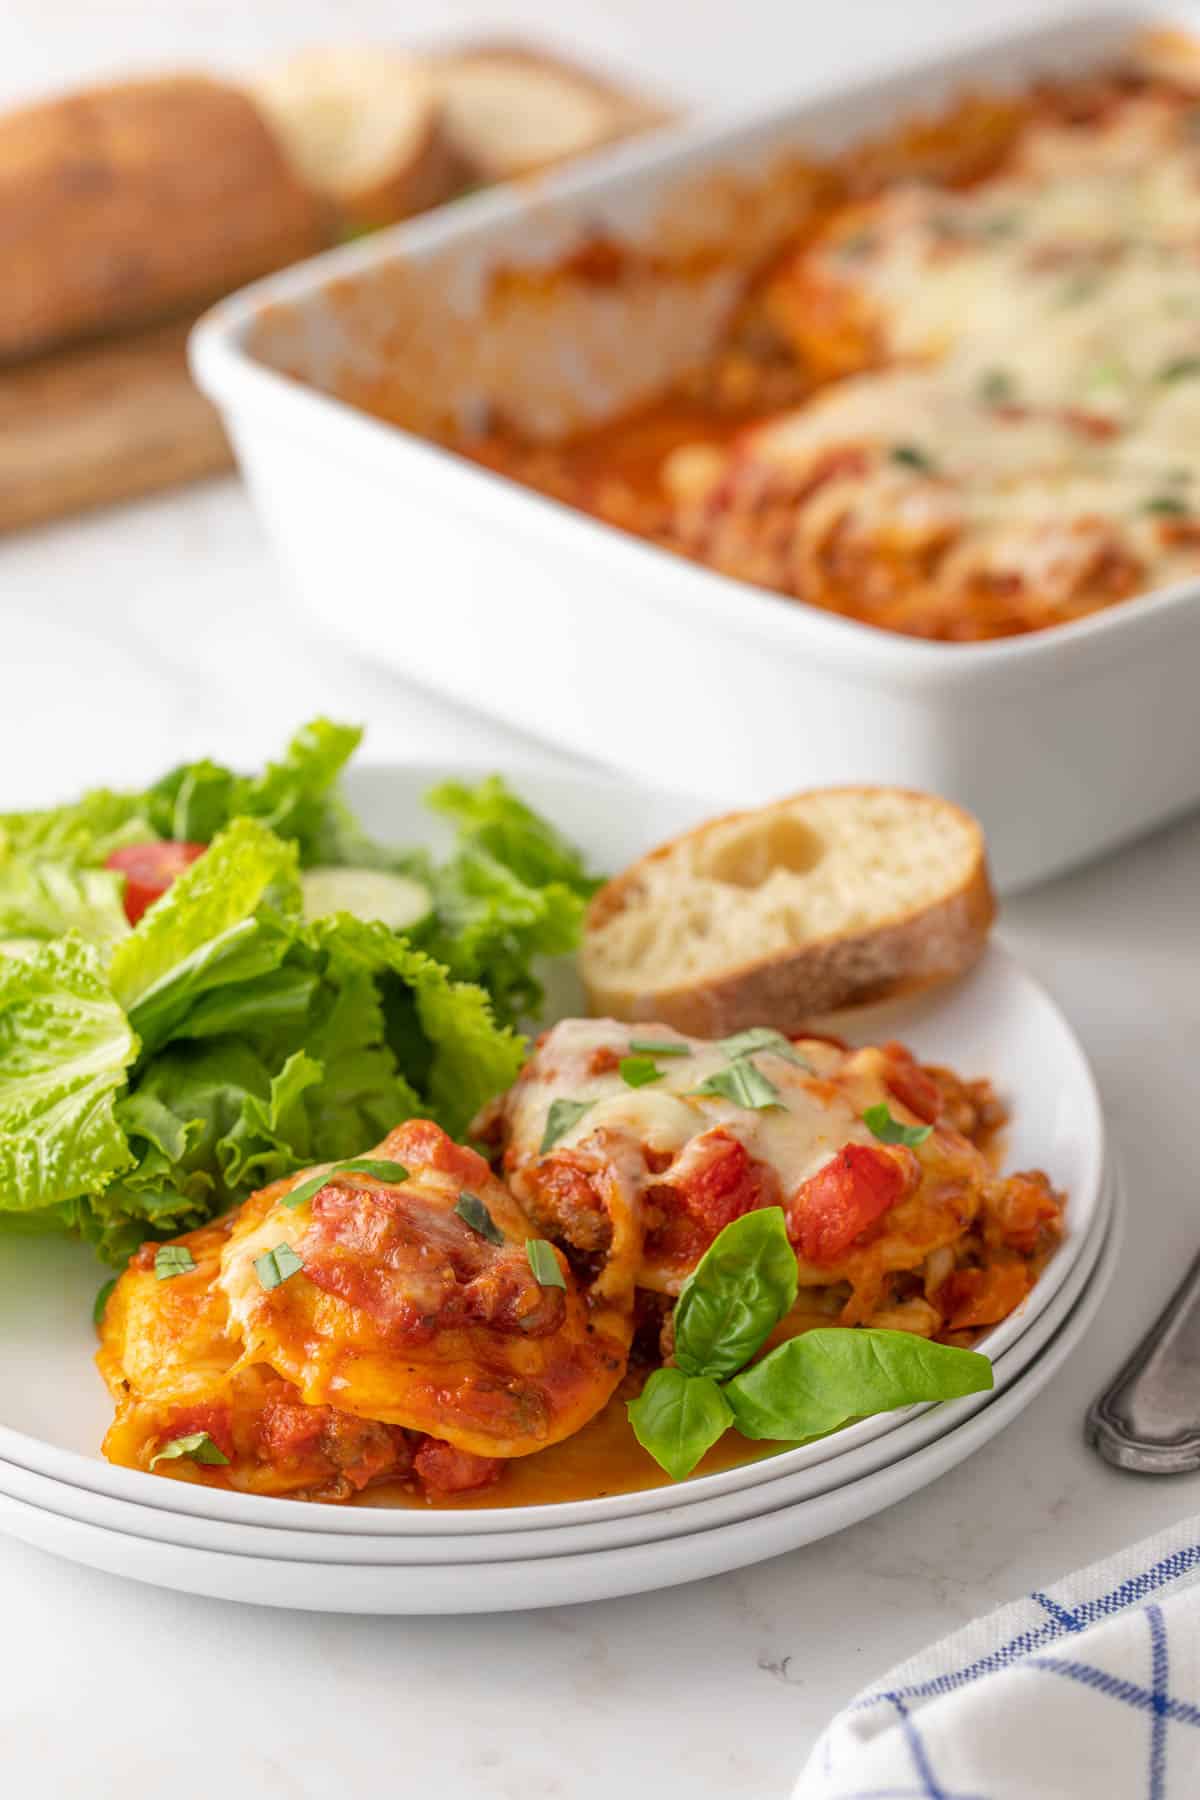 A serving of baked ravioli on a white plate with salad and a slice of French bread.